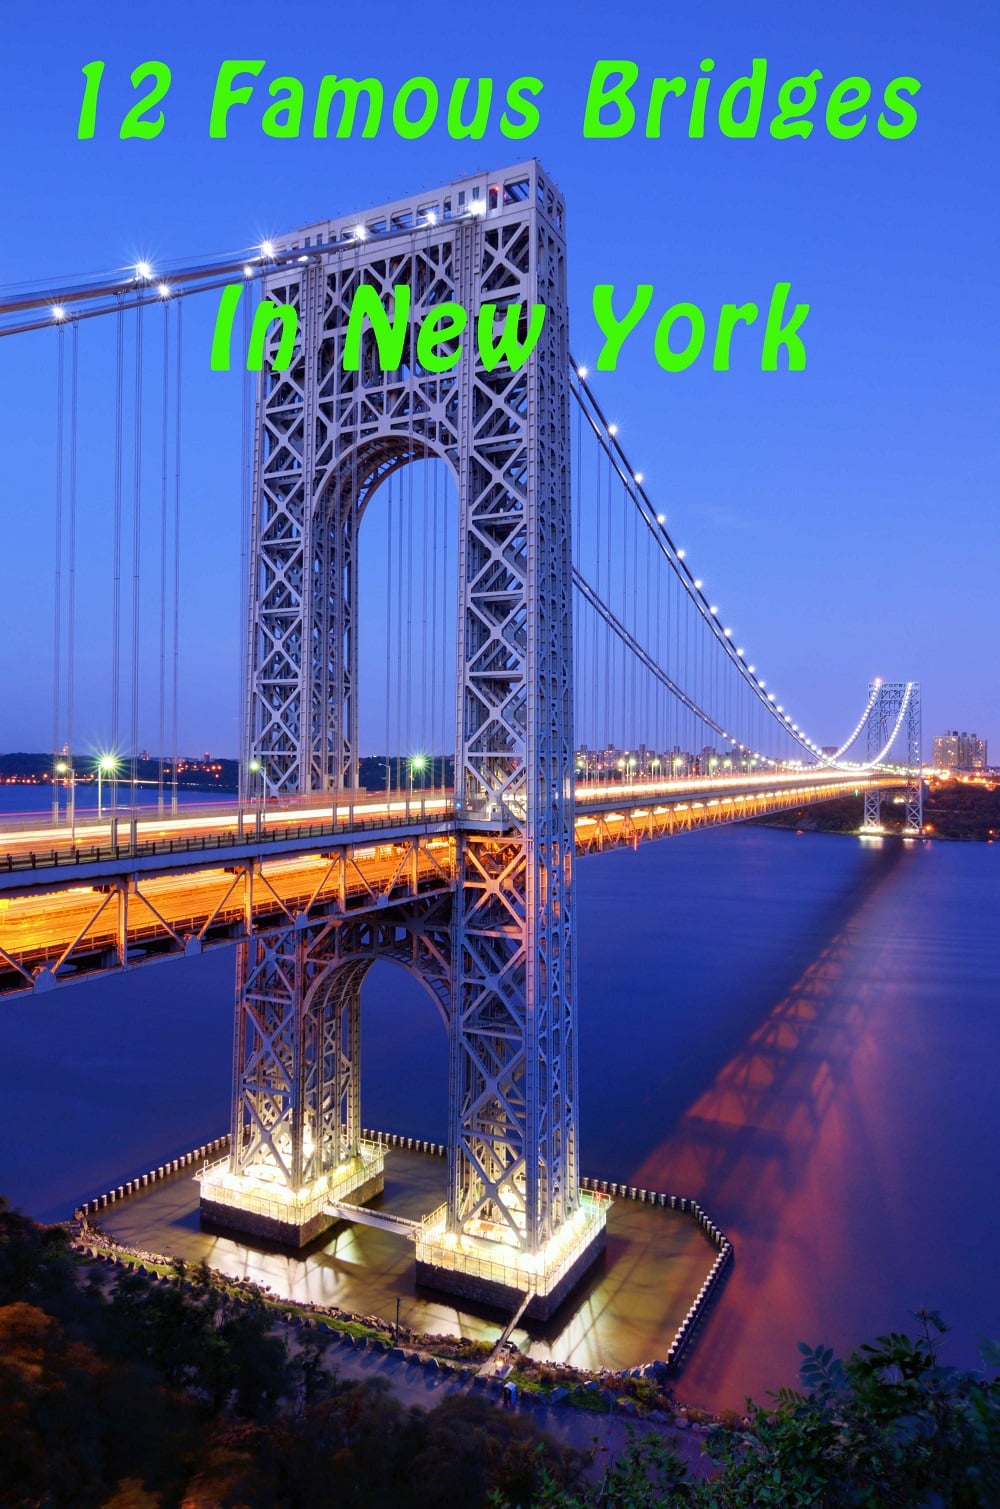 The George Washington Bridge spans the Hudson River from Fort Lee New Jersey to the Washington Heights neighborhood in the borough of Manhattan